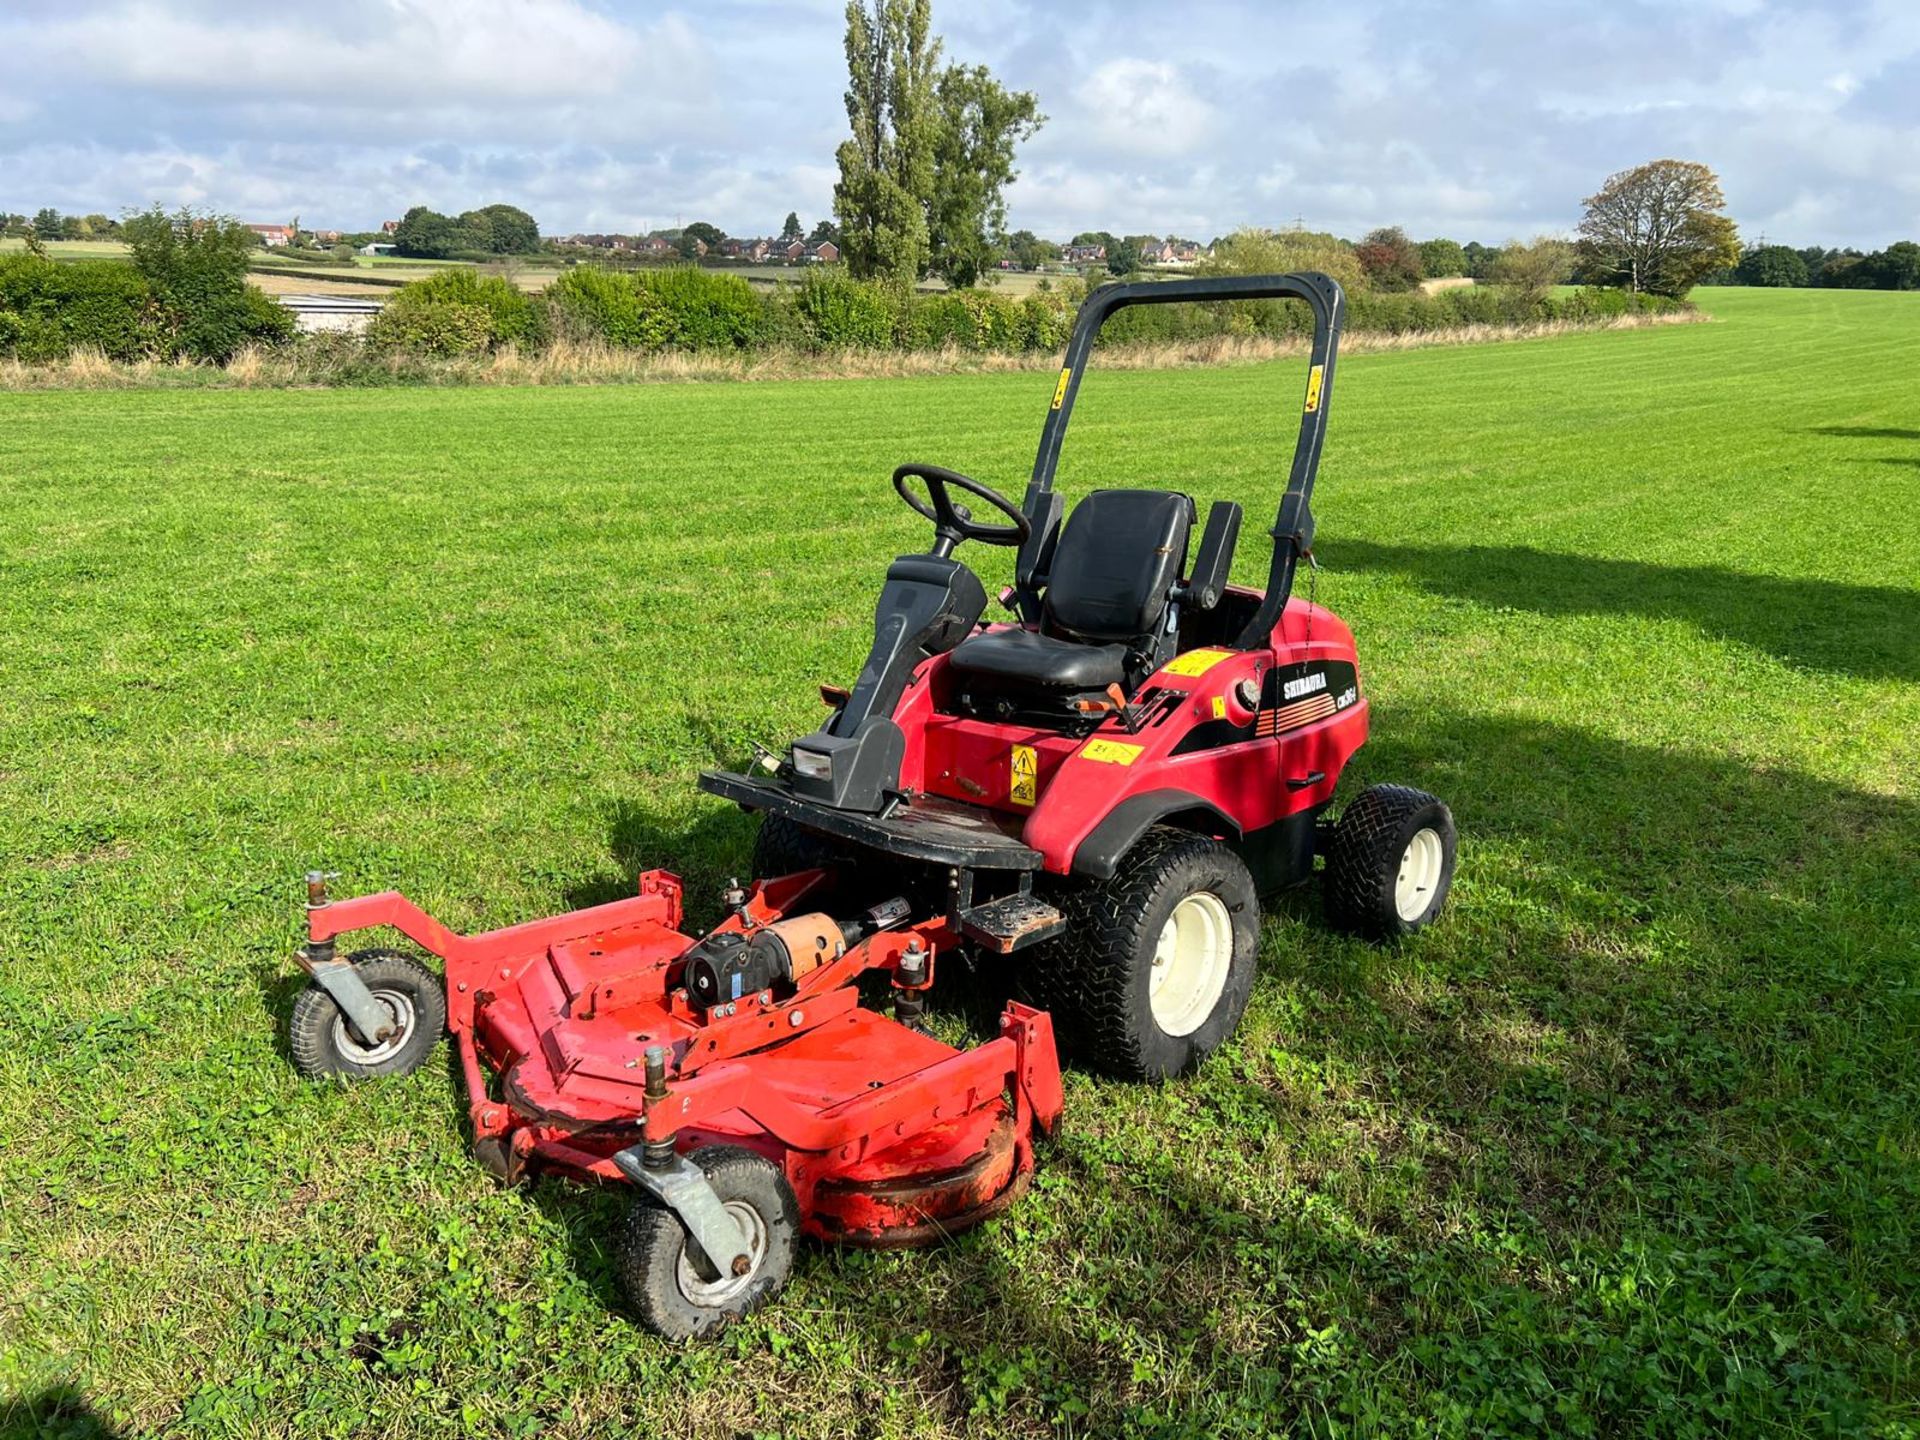 Shibaura CM364 4WD Outfront Ride On Mower *PLUS VAT* - Image 5 of 17